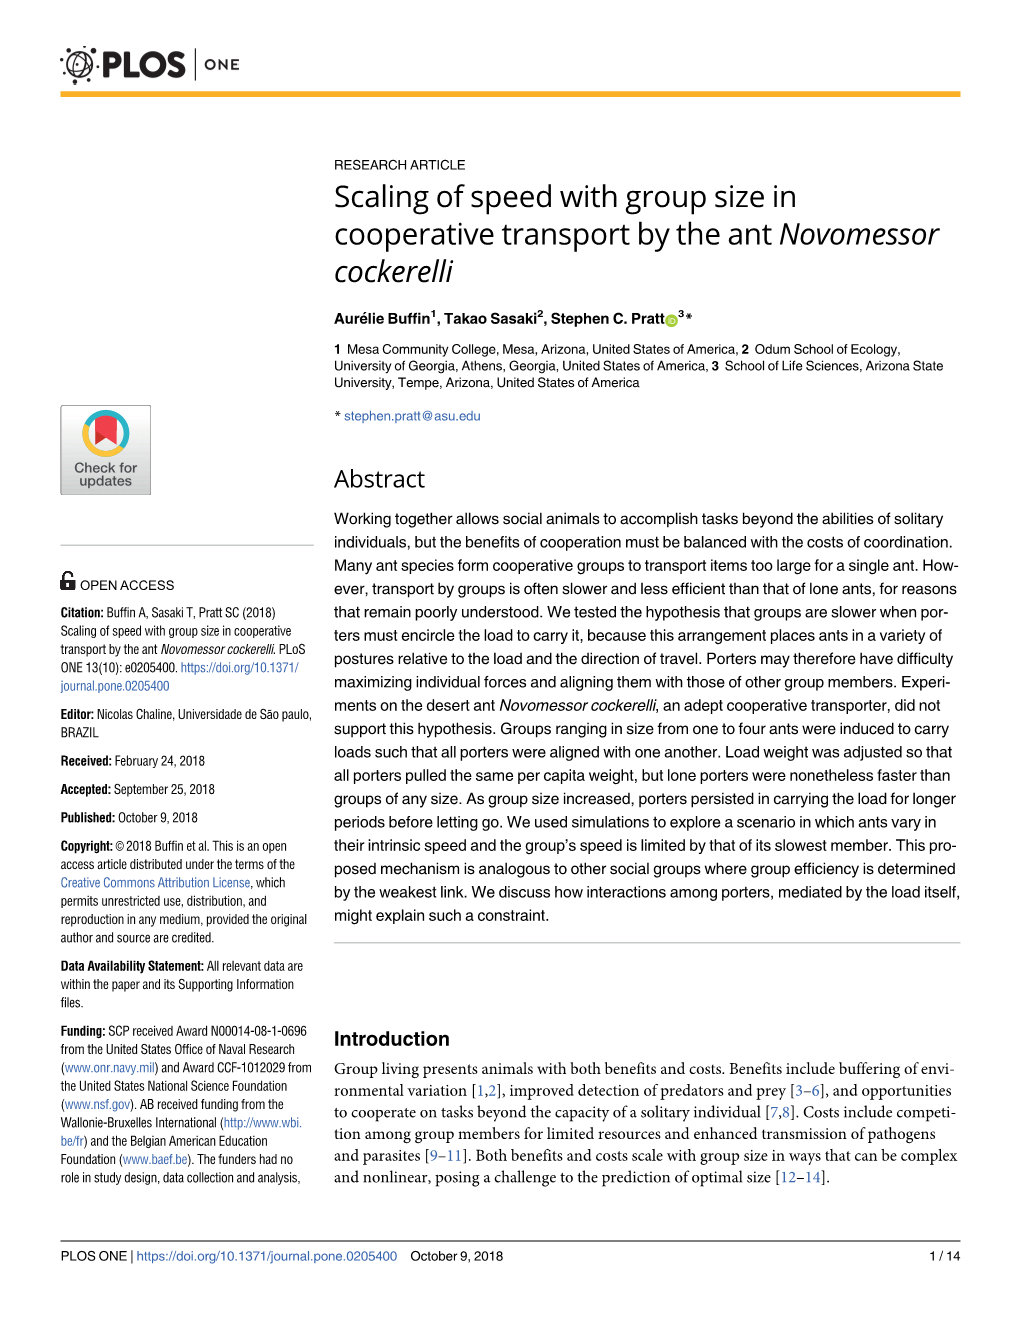 Scaling of Speed with Group Size in Cooperative Transport by the Ant Novomessor Cockerelli